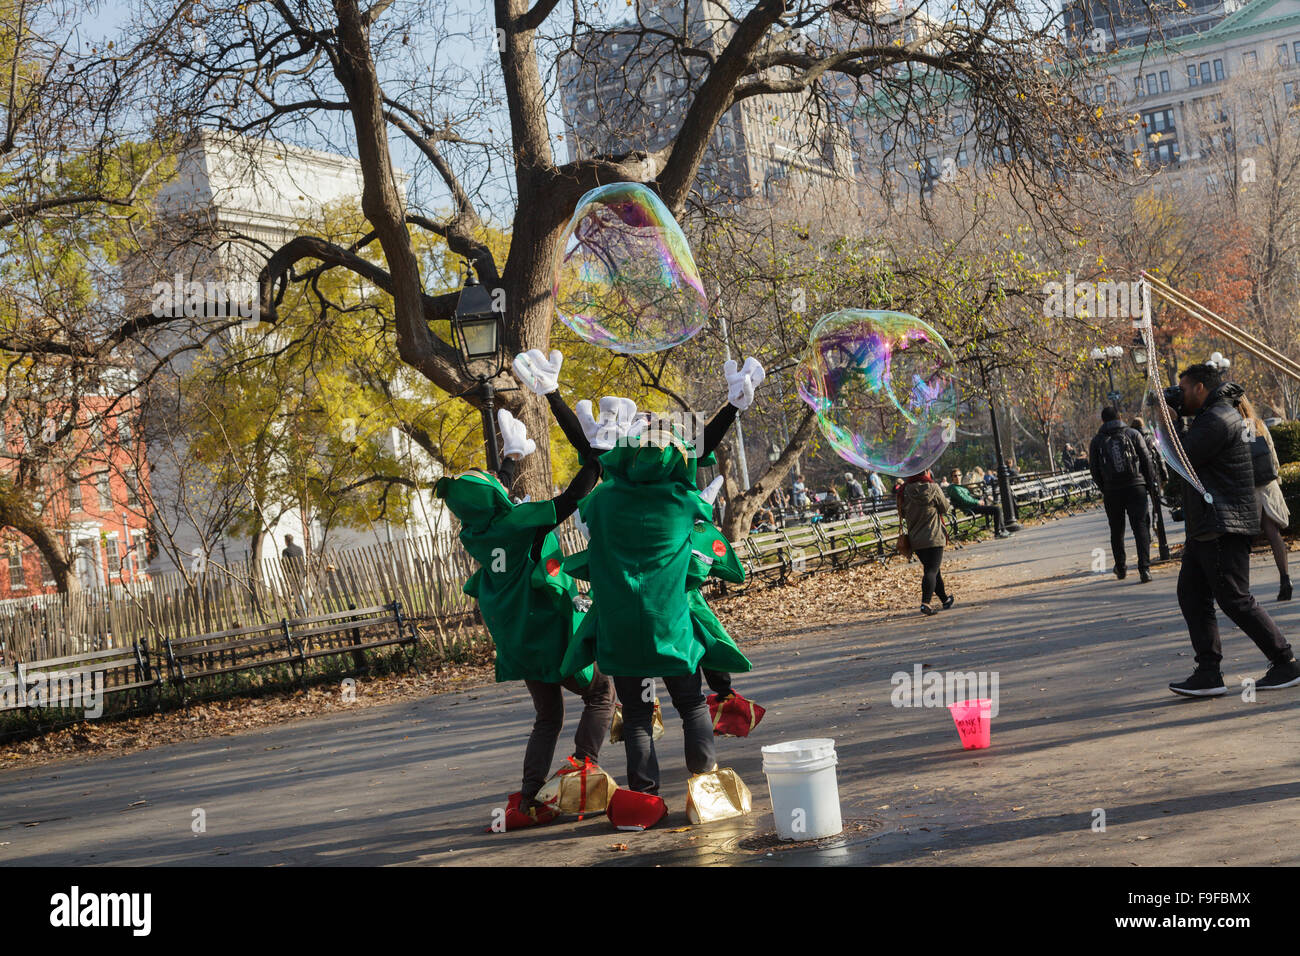 Men dressed in Christmas costumes chase giant bubbles Washington Square, East Village, New York City, USA Stock Photo